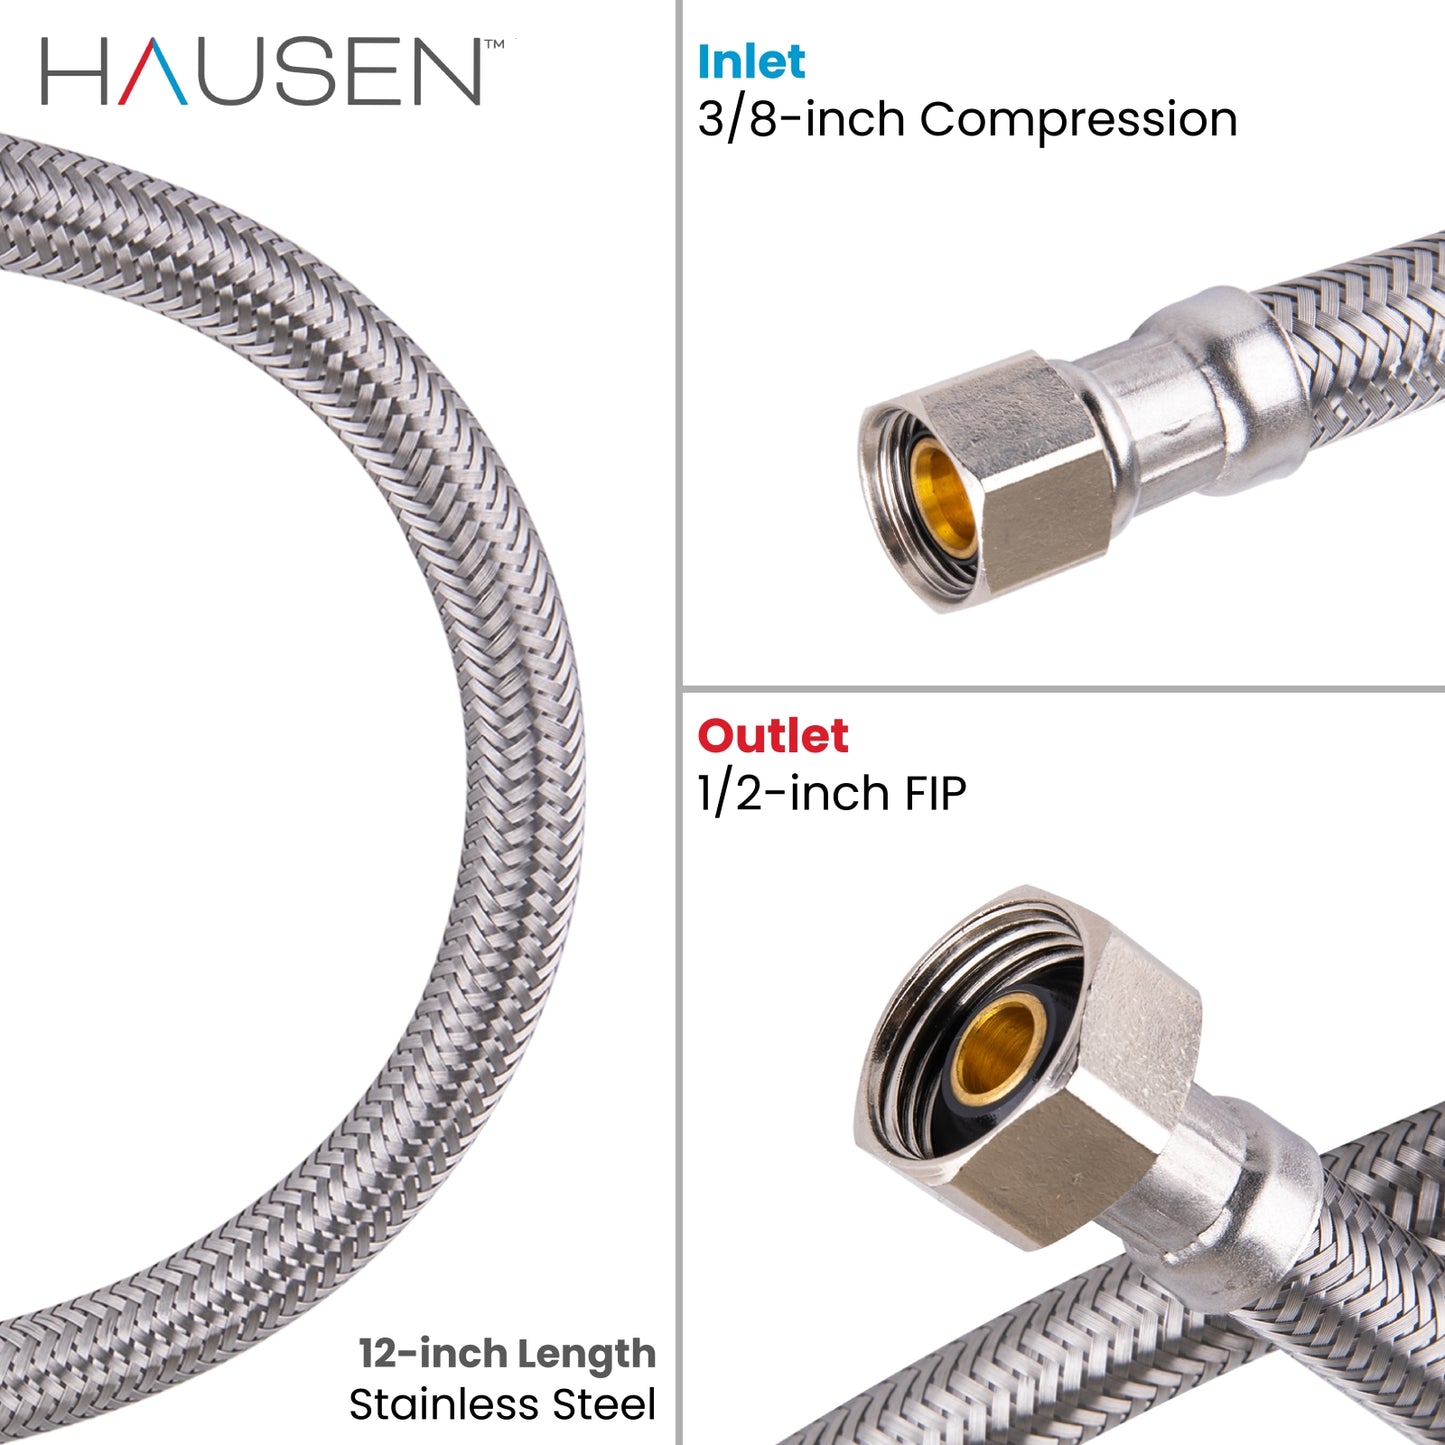 Hausen 3/8-inch Compression x 1/2-inch FIP x 12-inch Length Stainless Steel Faucet Water Supply Connector, 2-Pack